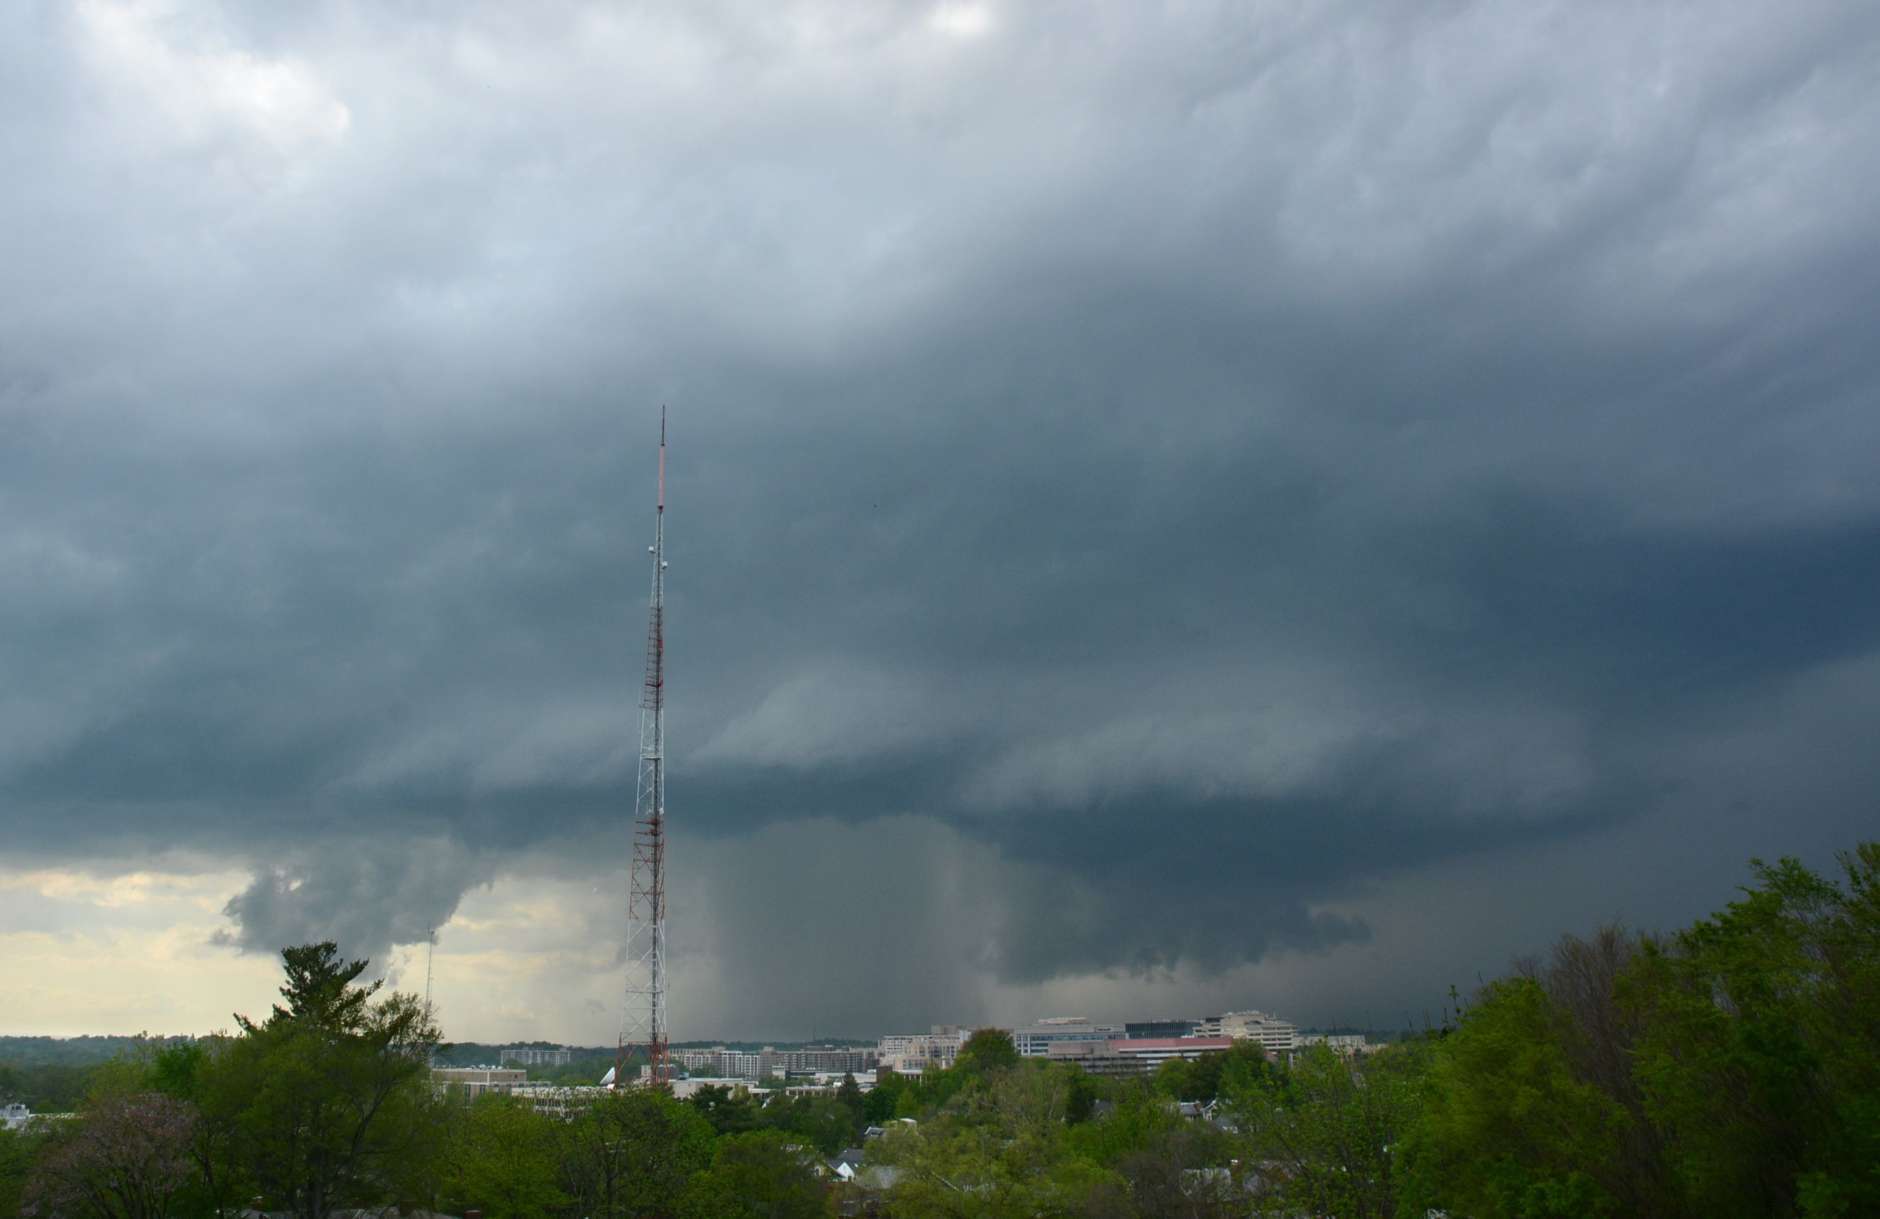 On April 21, 2017, an intense, rotating thunderstorm blew into the northern suburbs of Washington. The supercell storm produced hail stones the size of quarters and golf balls in a swath from Chevy Chase to Takoma Park and downed countless trees that afternoon. (WTOP/Dave Dildine)